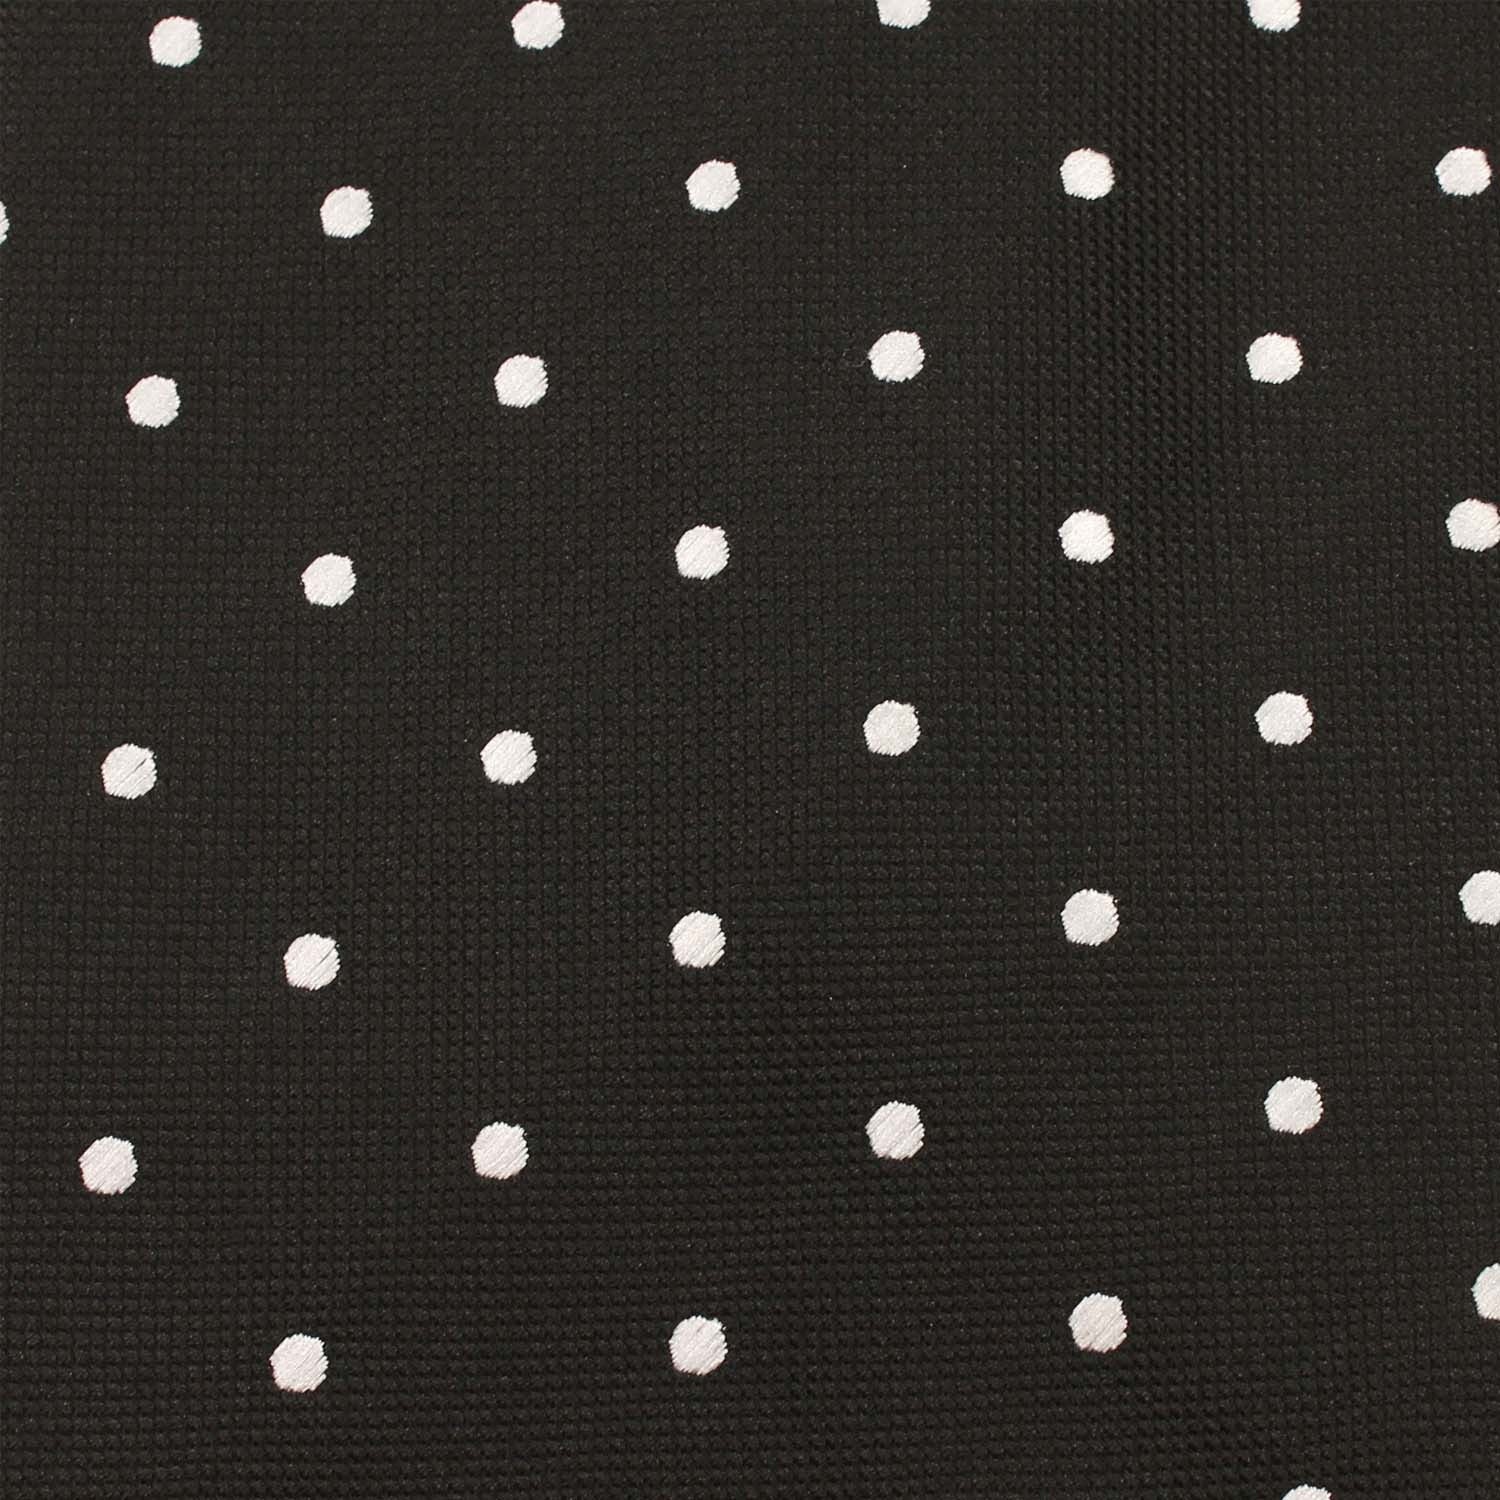 Coal Black with White Polka Dots Fabric Bow Tie X327